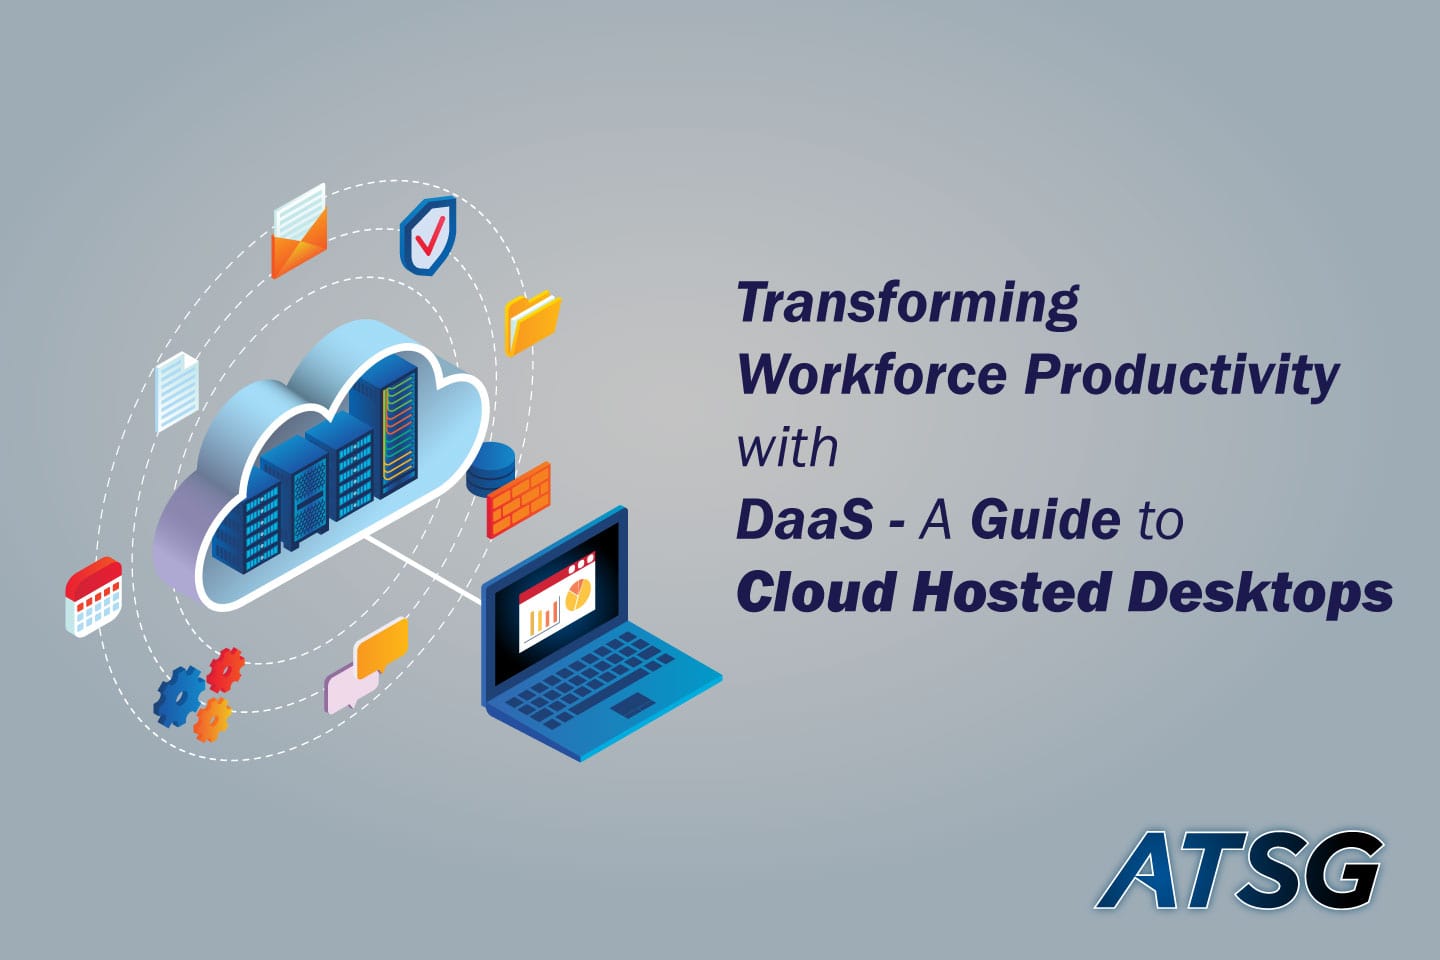 Transforming-Workforce-Productivity-with-DaaS-A-Guide-to-Cloud-Hosted-Desktops-Featured